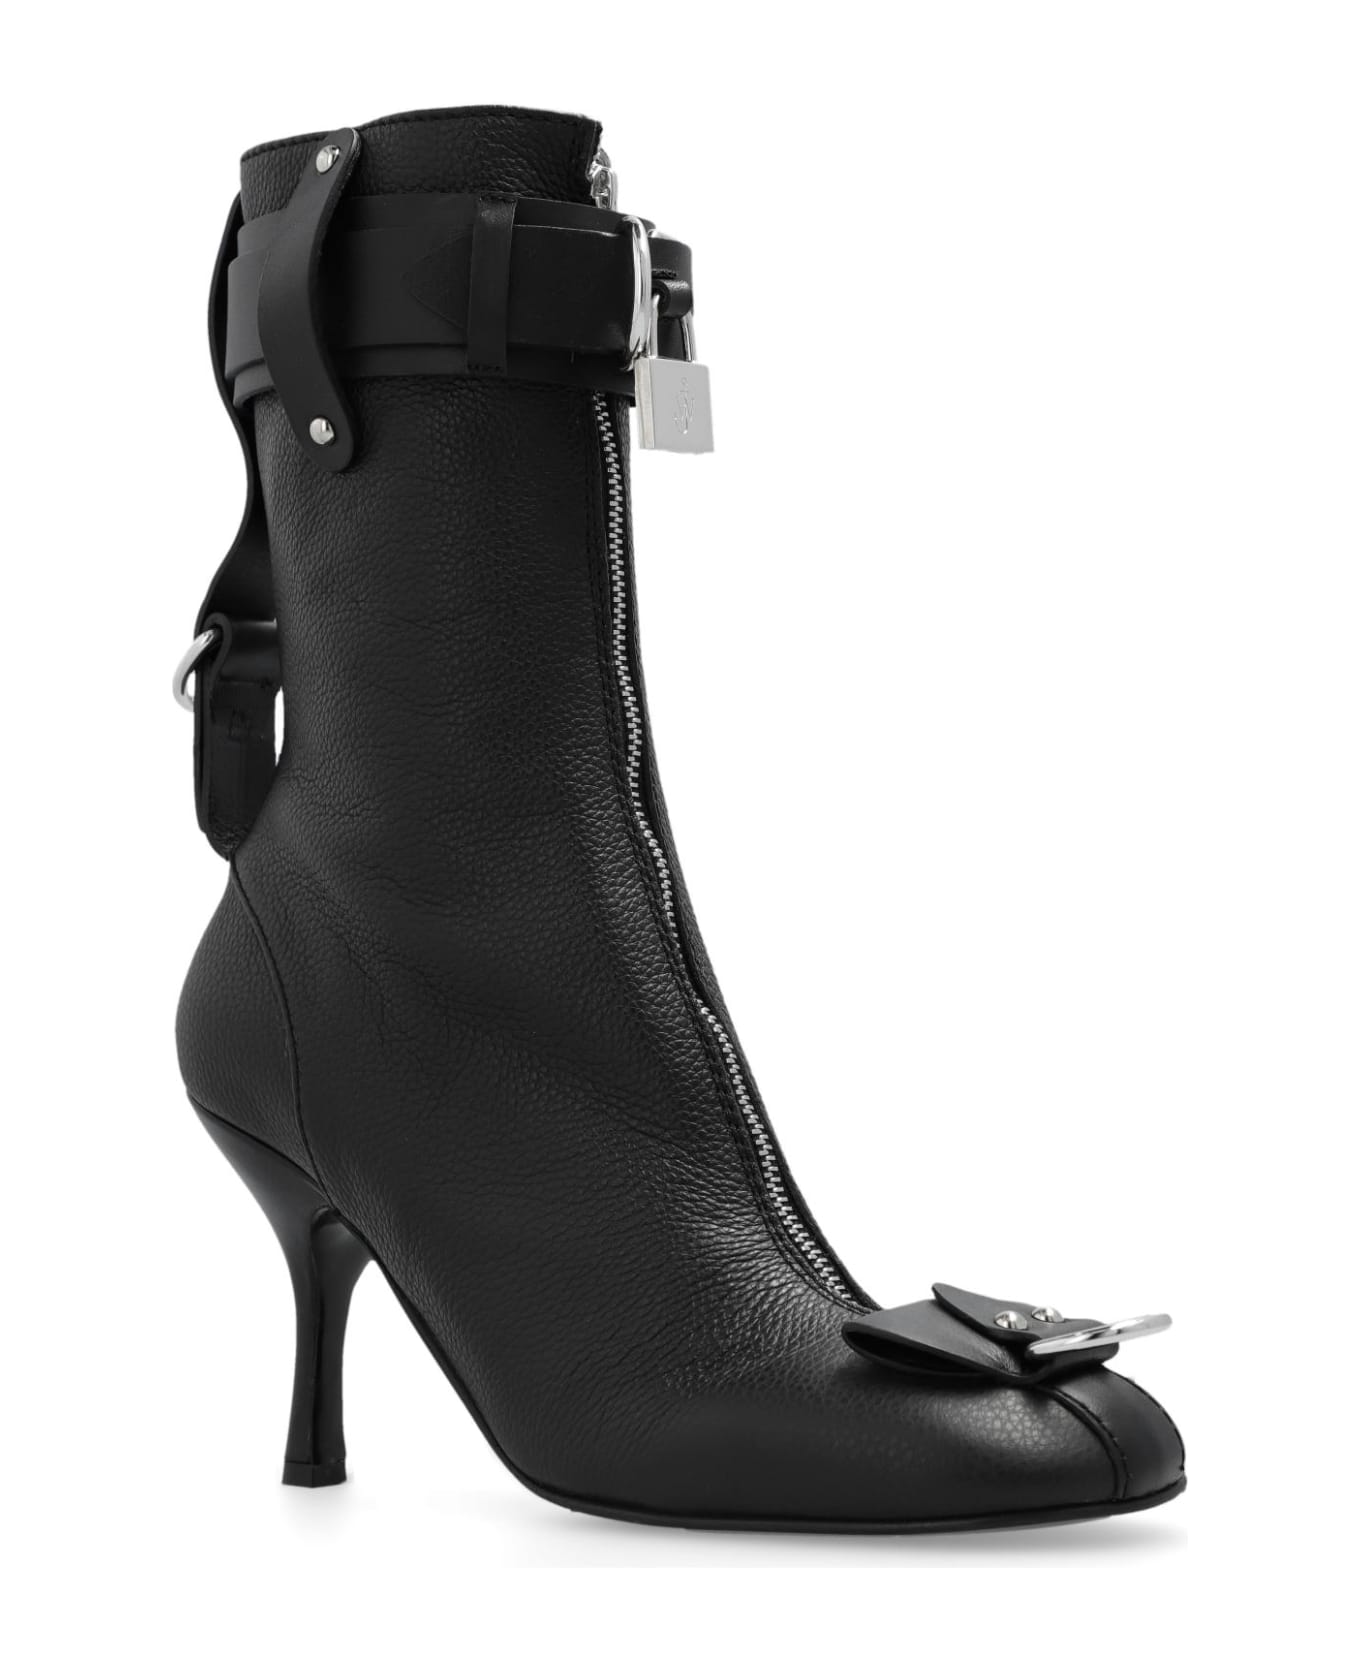 J.W. Anderson Heeled Boots In Leather - Black ブーツ